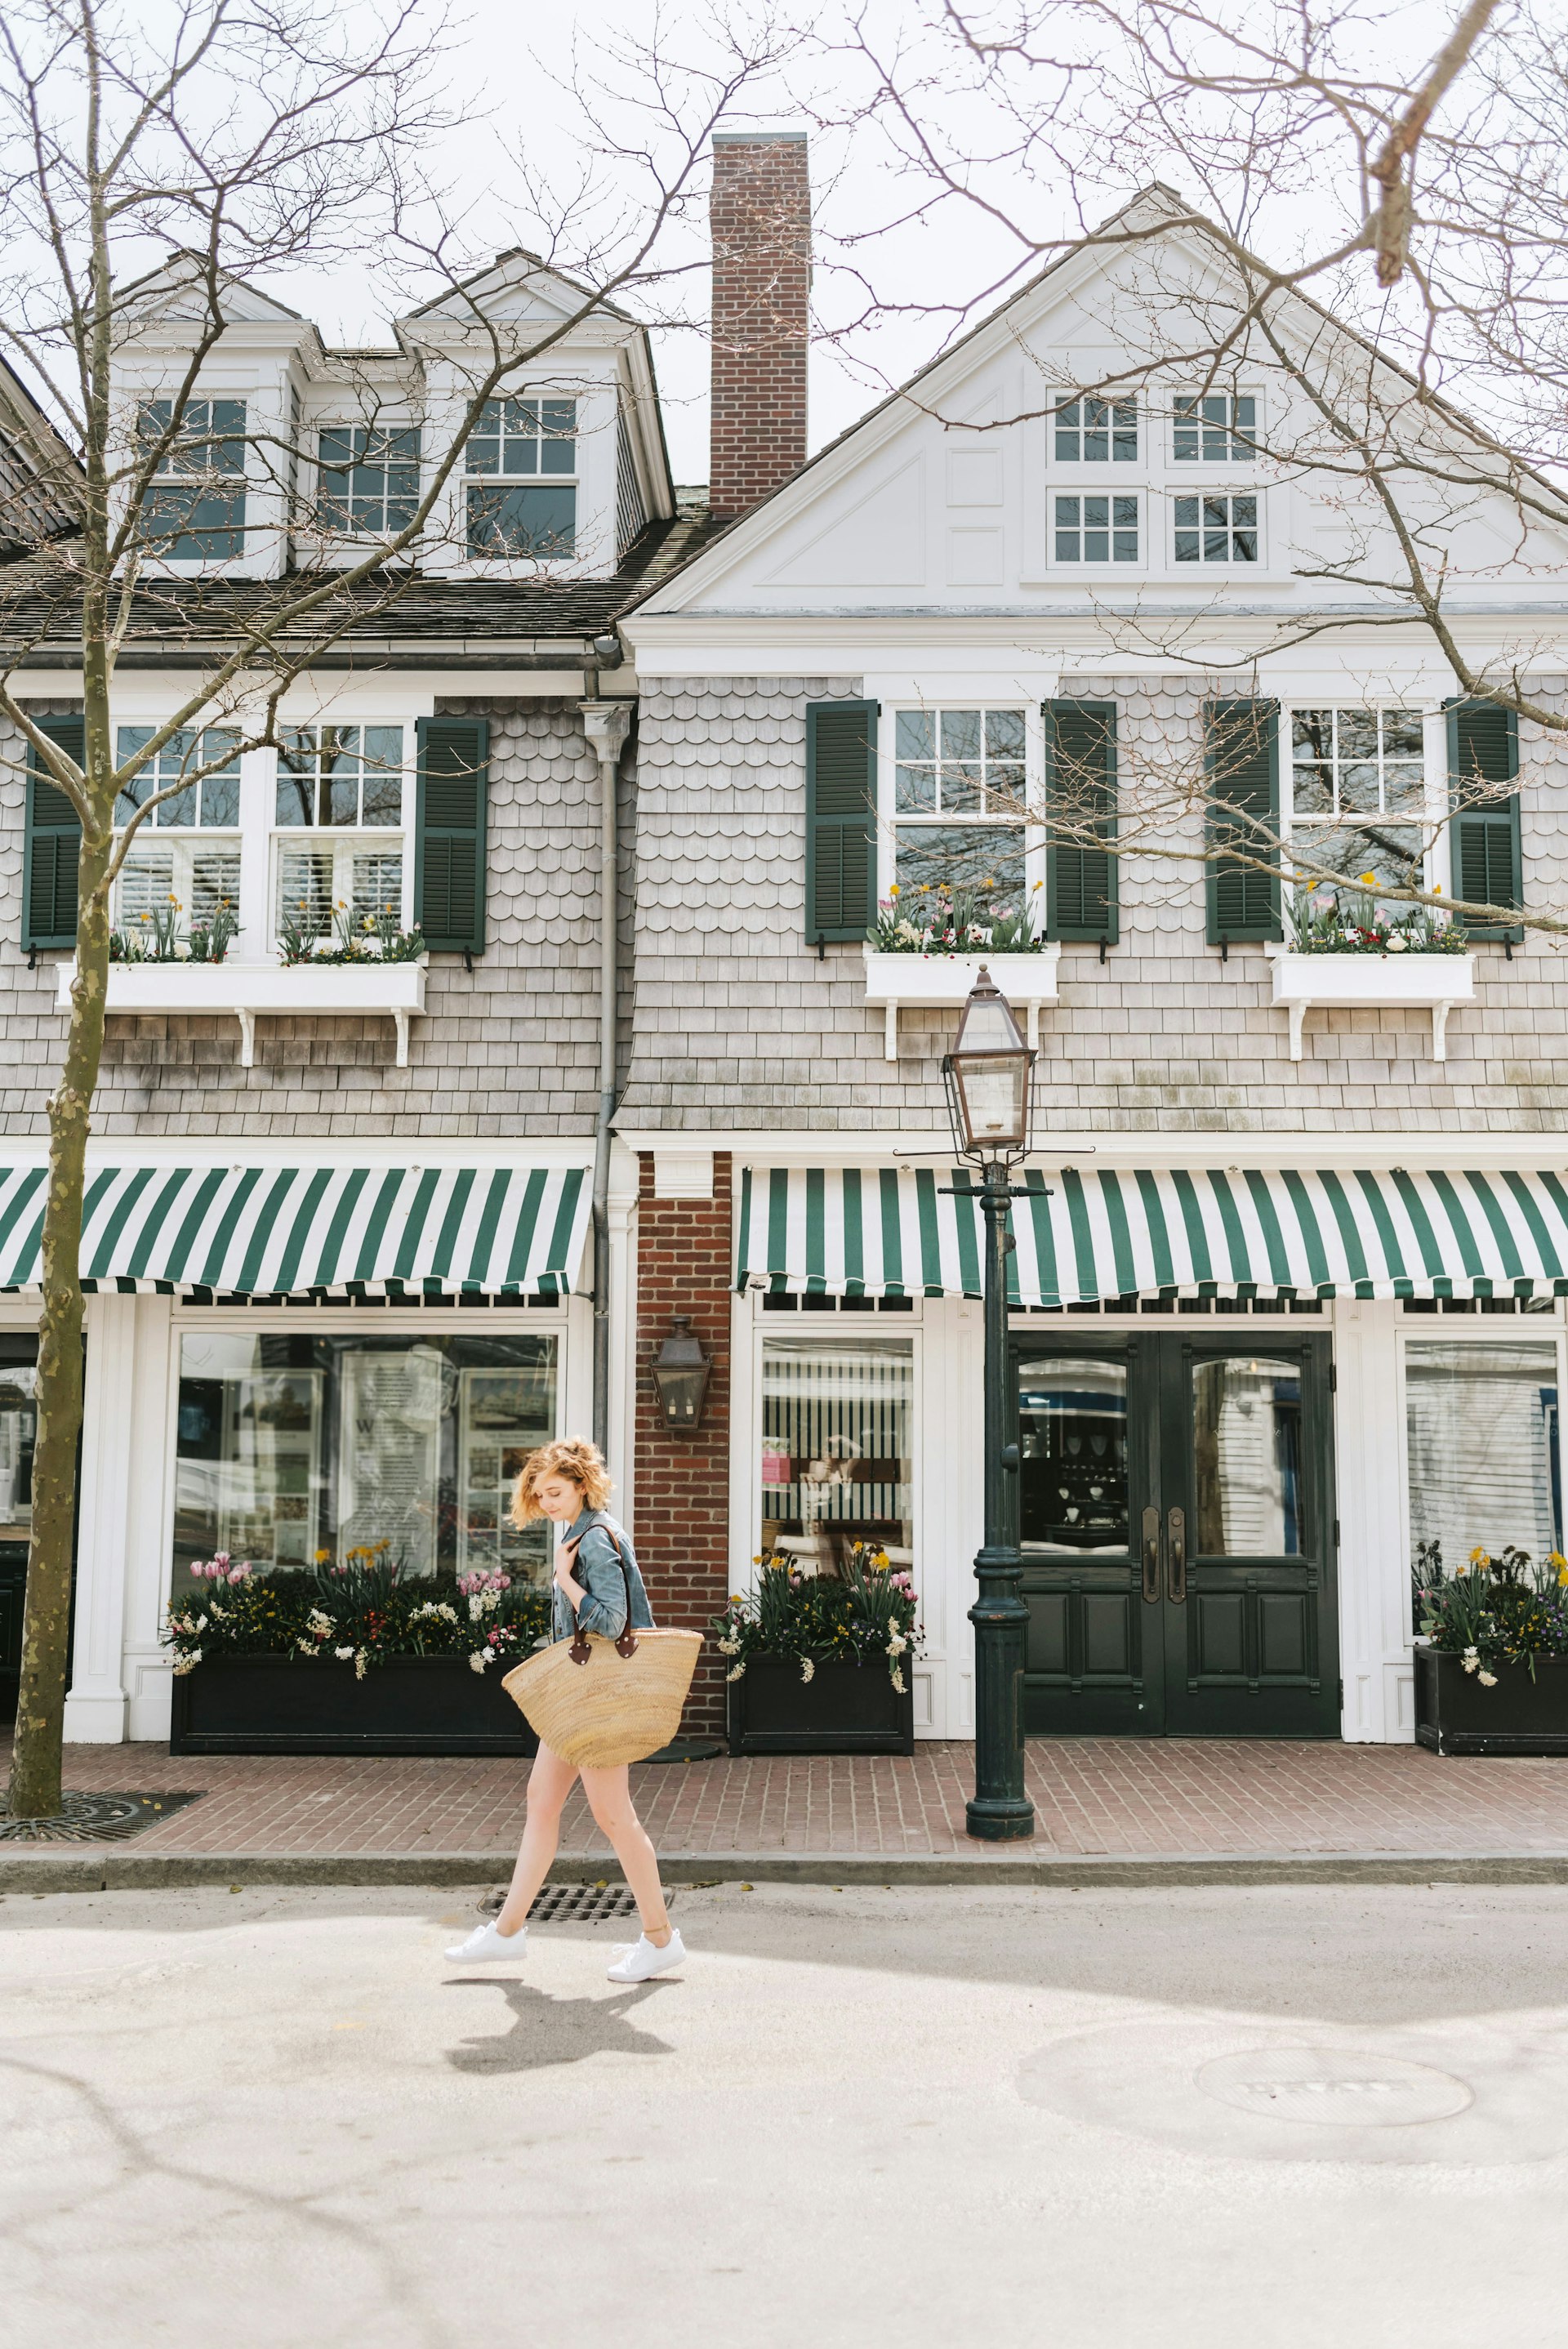 A woman carrying a large straw bag walks past a store with a striped green and white awning in Martha's Vineyard. 